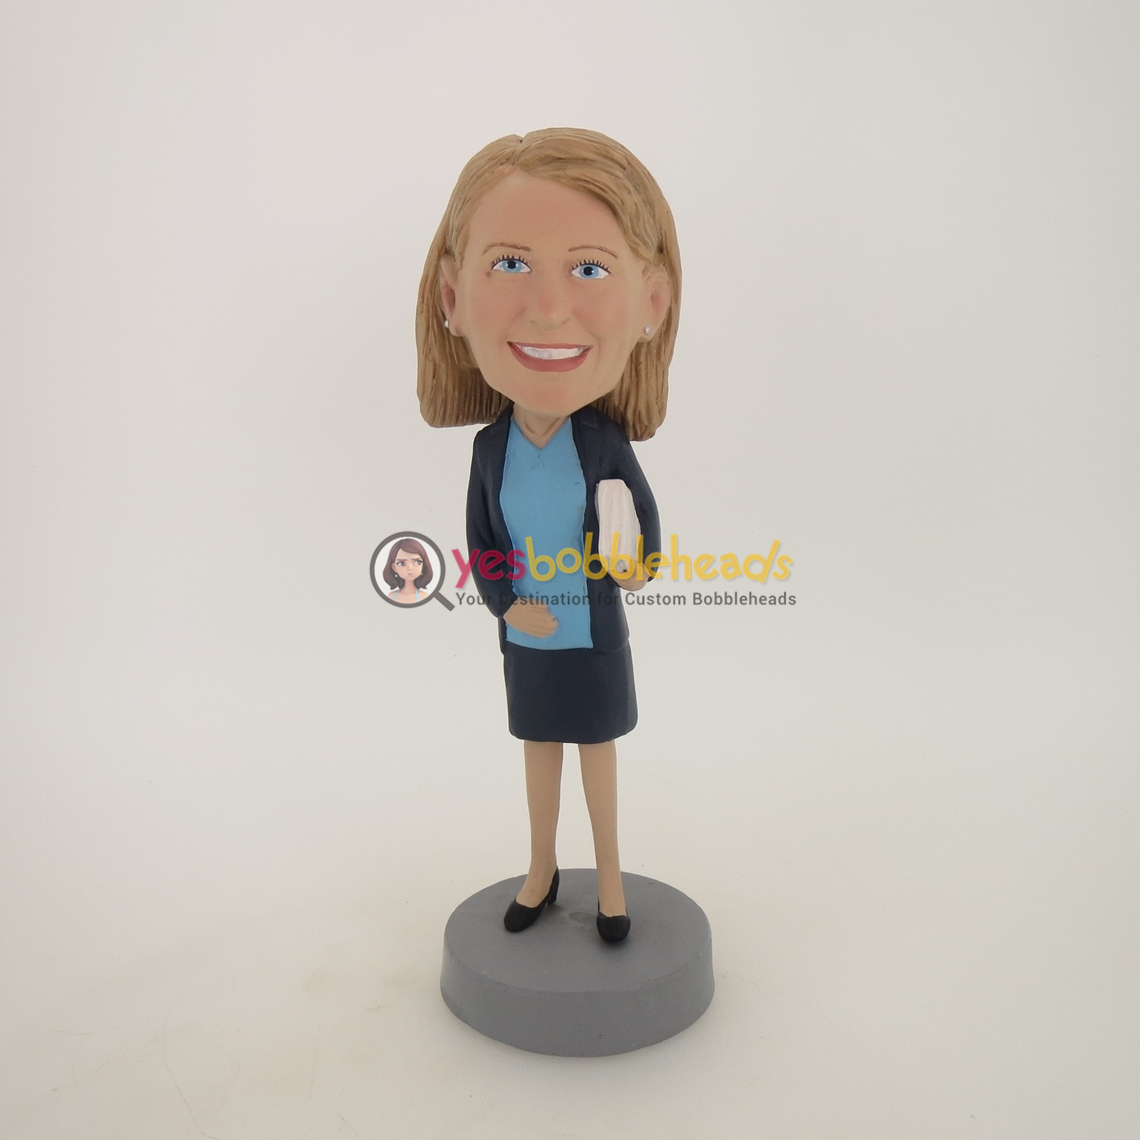 Picture of Custom Bobblehead Doll: Female Teacher with Book